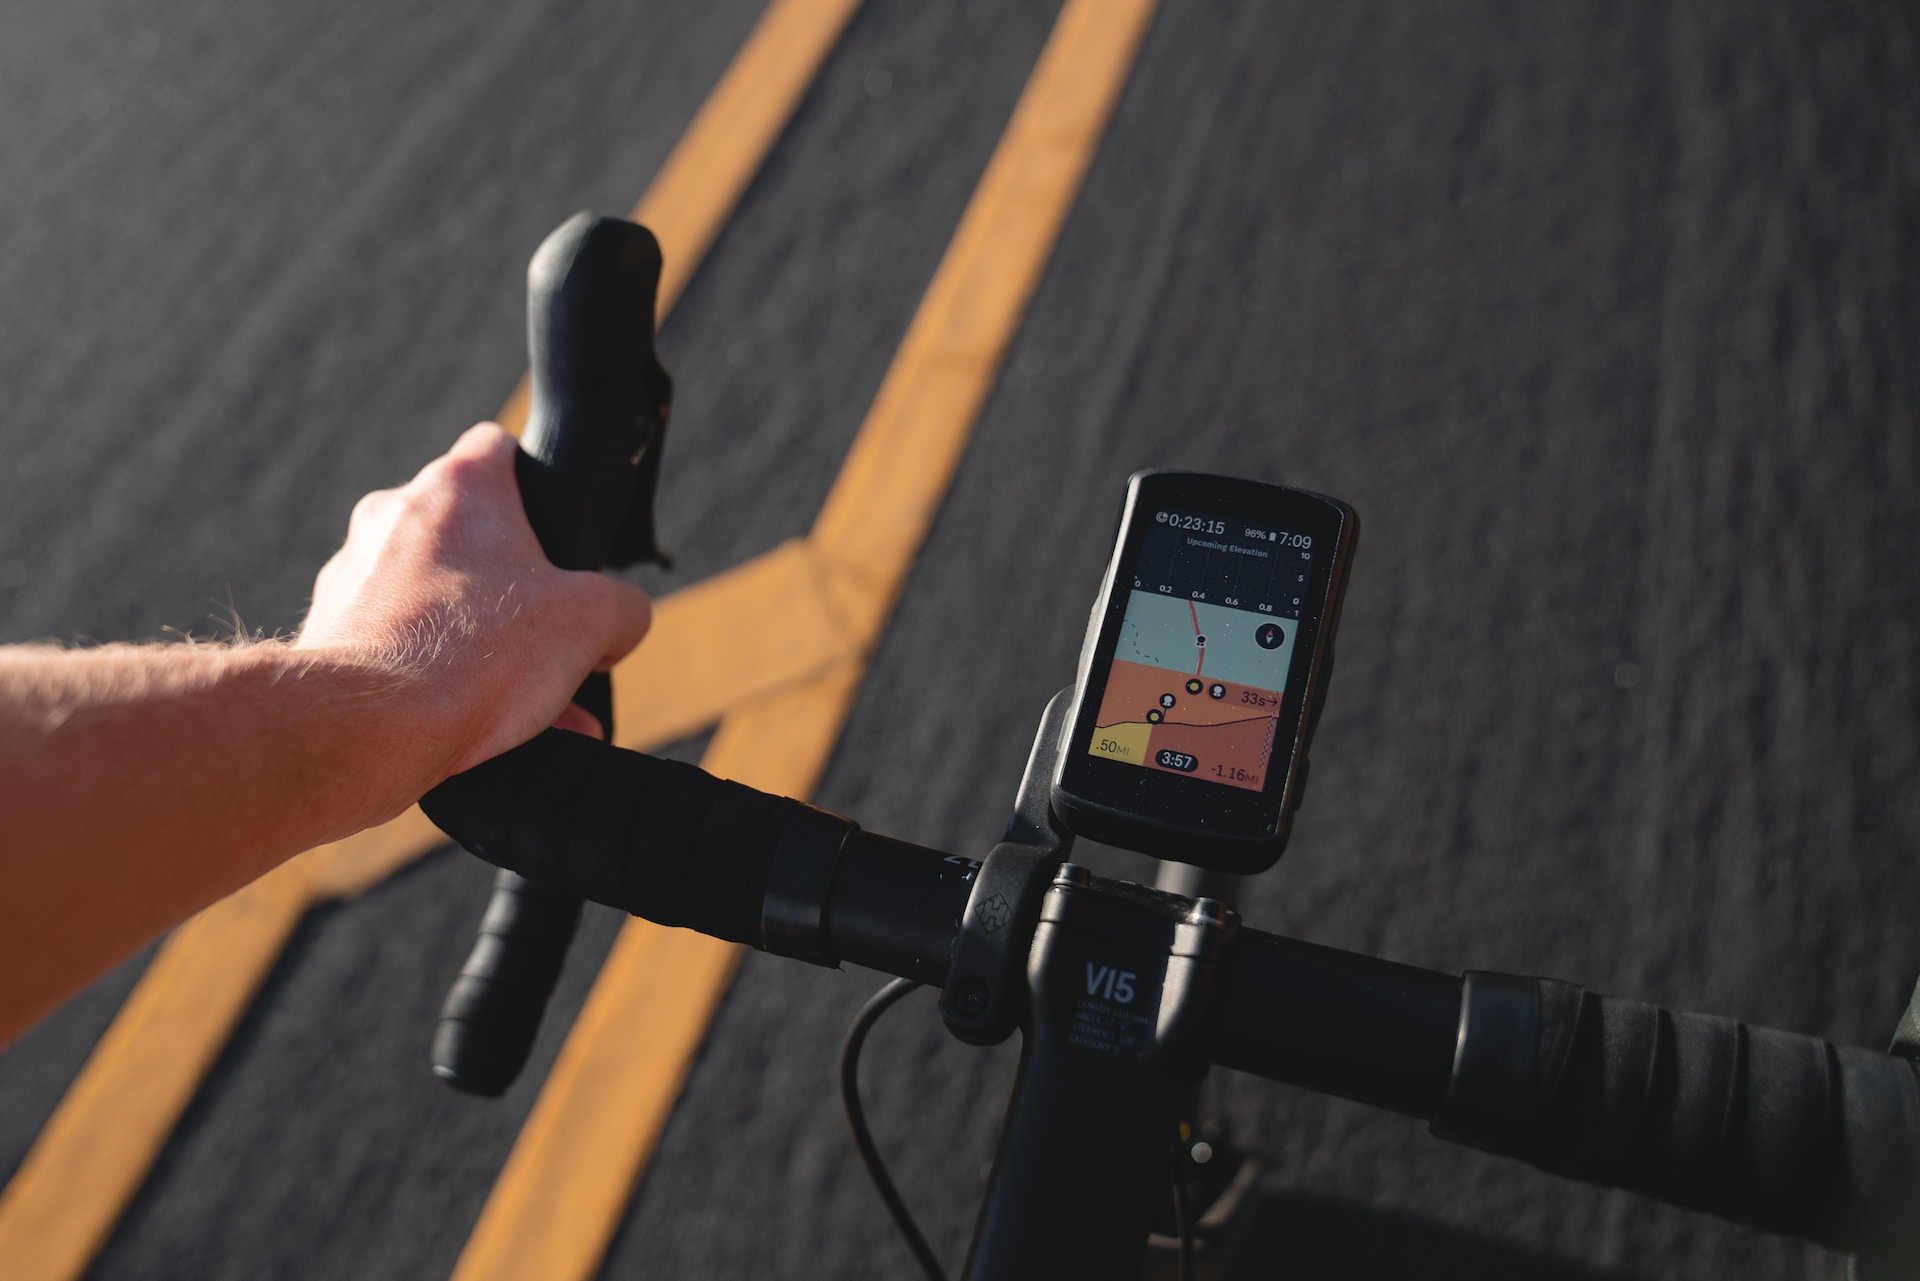 the image shows a fitness watch on the bicycle handlebars